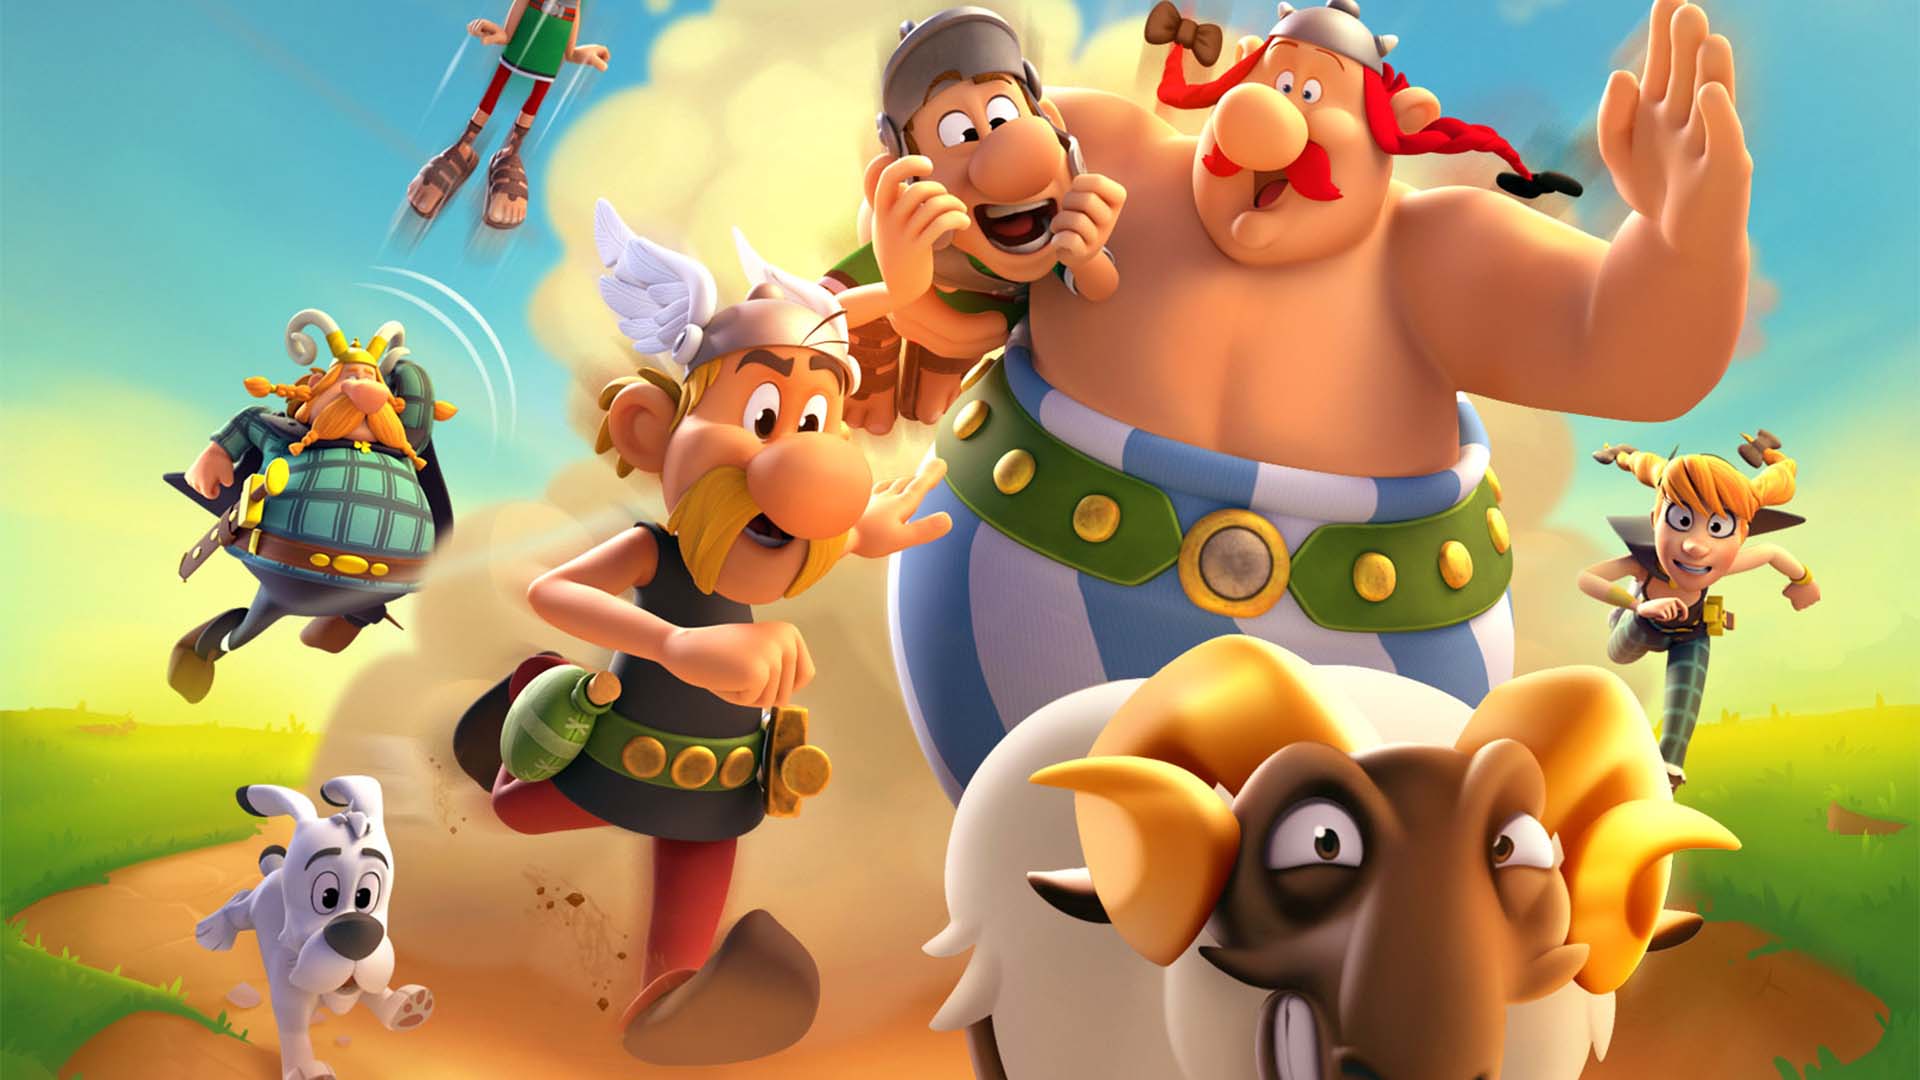 Asterix & Obelix: Heroes - Official Gameplay Teaser Trailer 